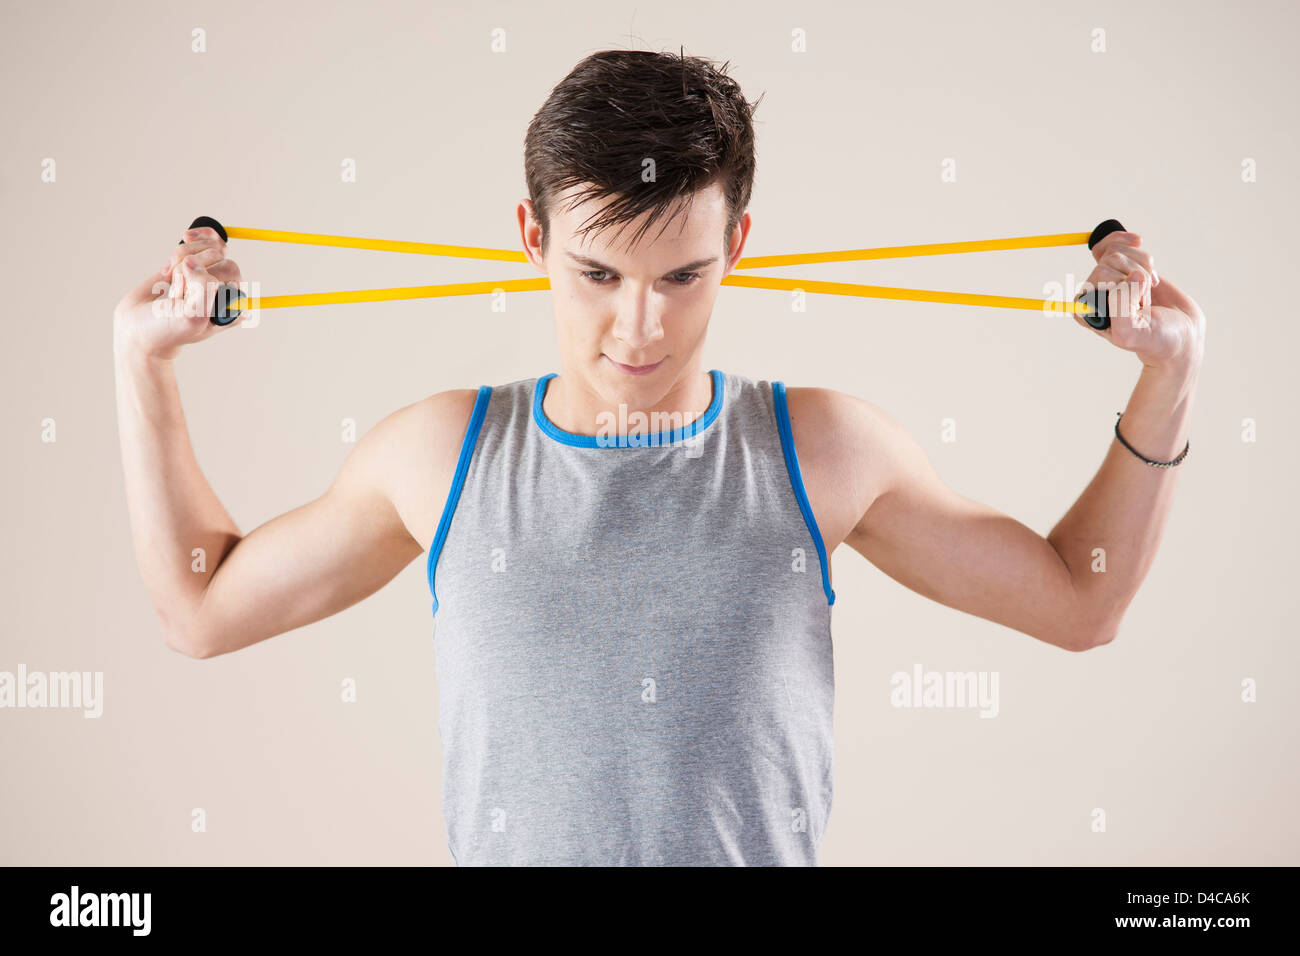 young man doing work out with a fitness strap Stock Photo